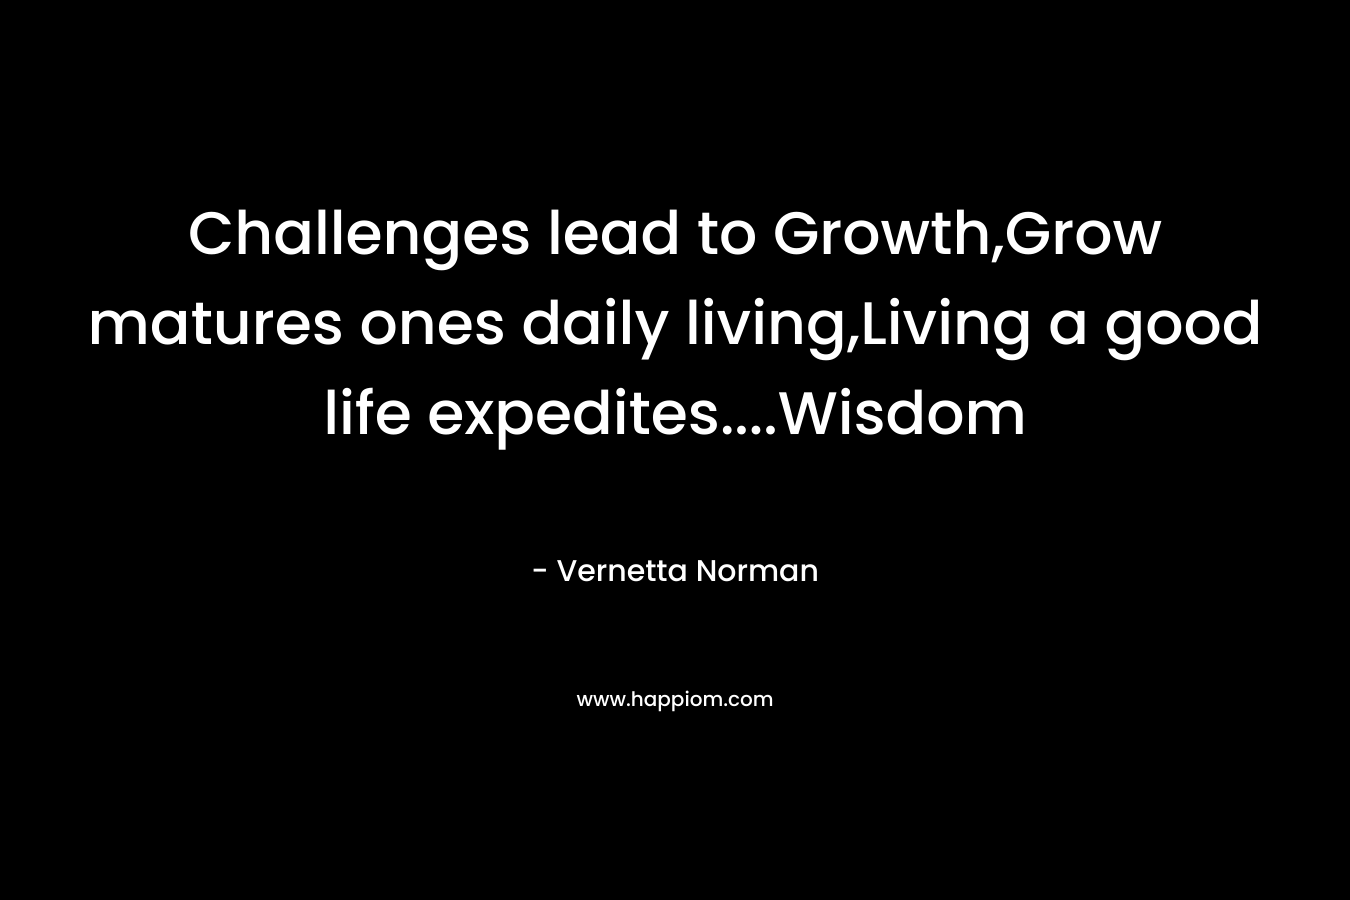 Challenges lead to Growth,Grow matures ones daily living,Living a good life expedites....Wisdom